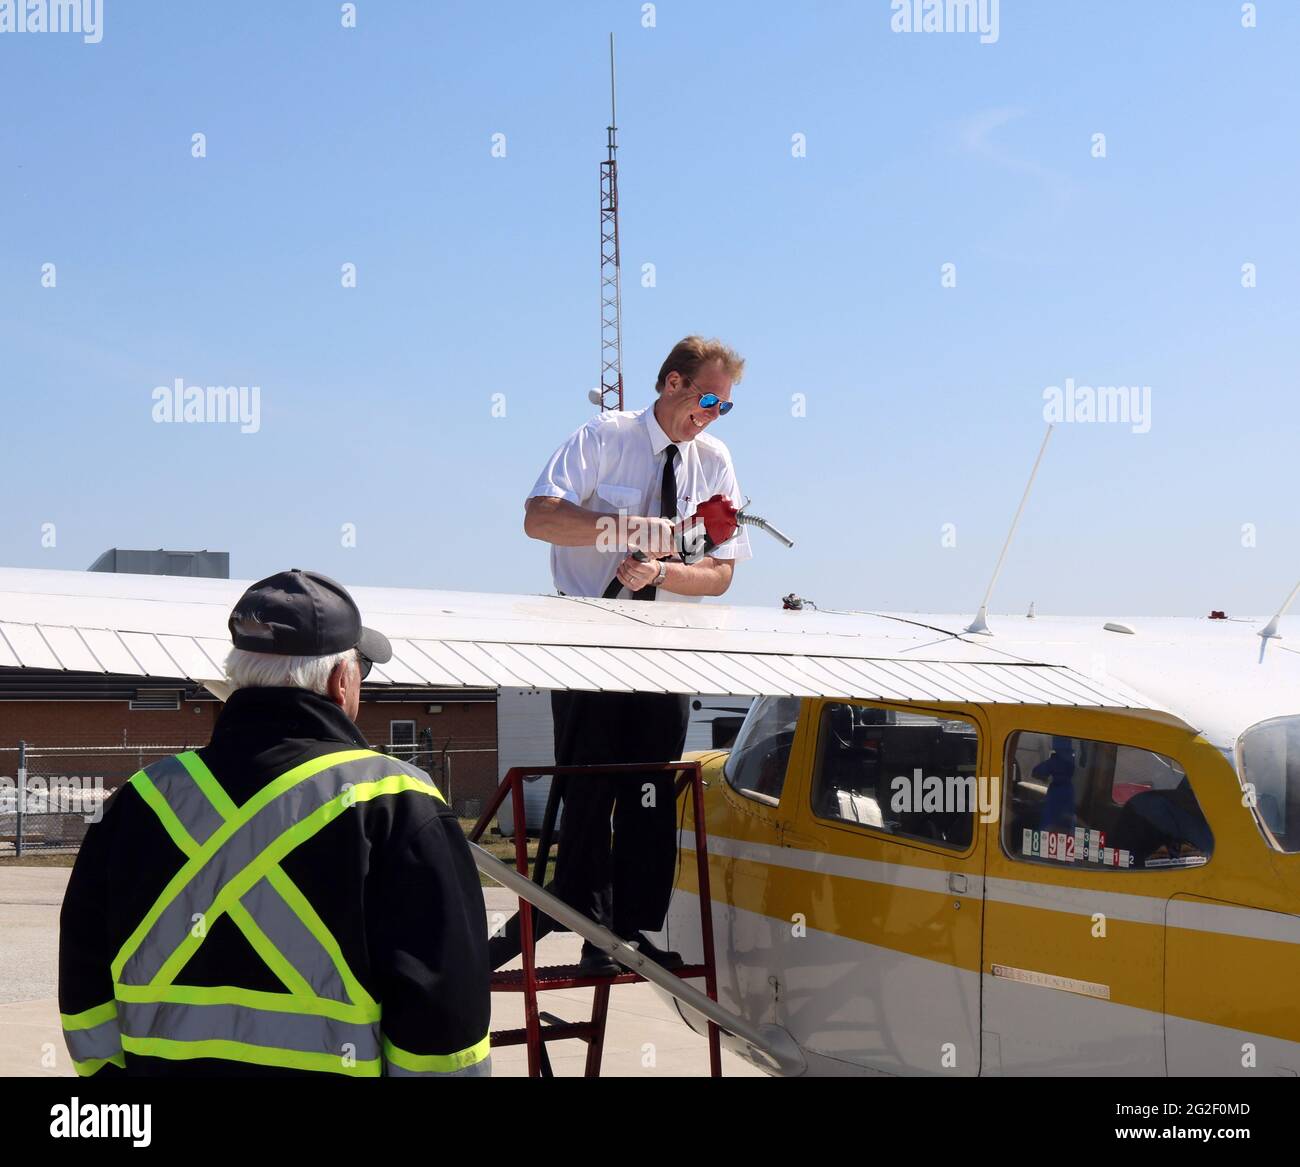 WIARTON, CANADA - Apr 04, 2021: Hanover, Ontario  Canada- April 4, 2021: A male flight instructor fueling up a yellow and white Cessna 172 as an airpo Stock Photo